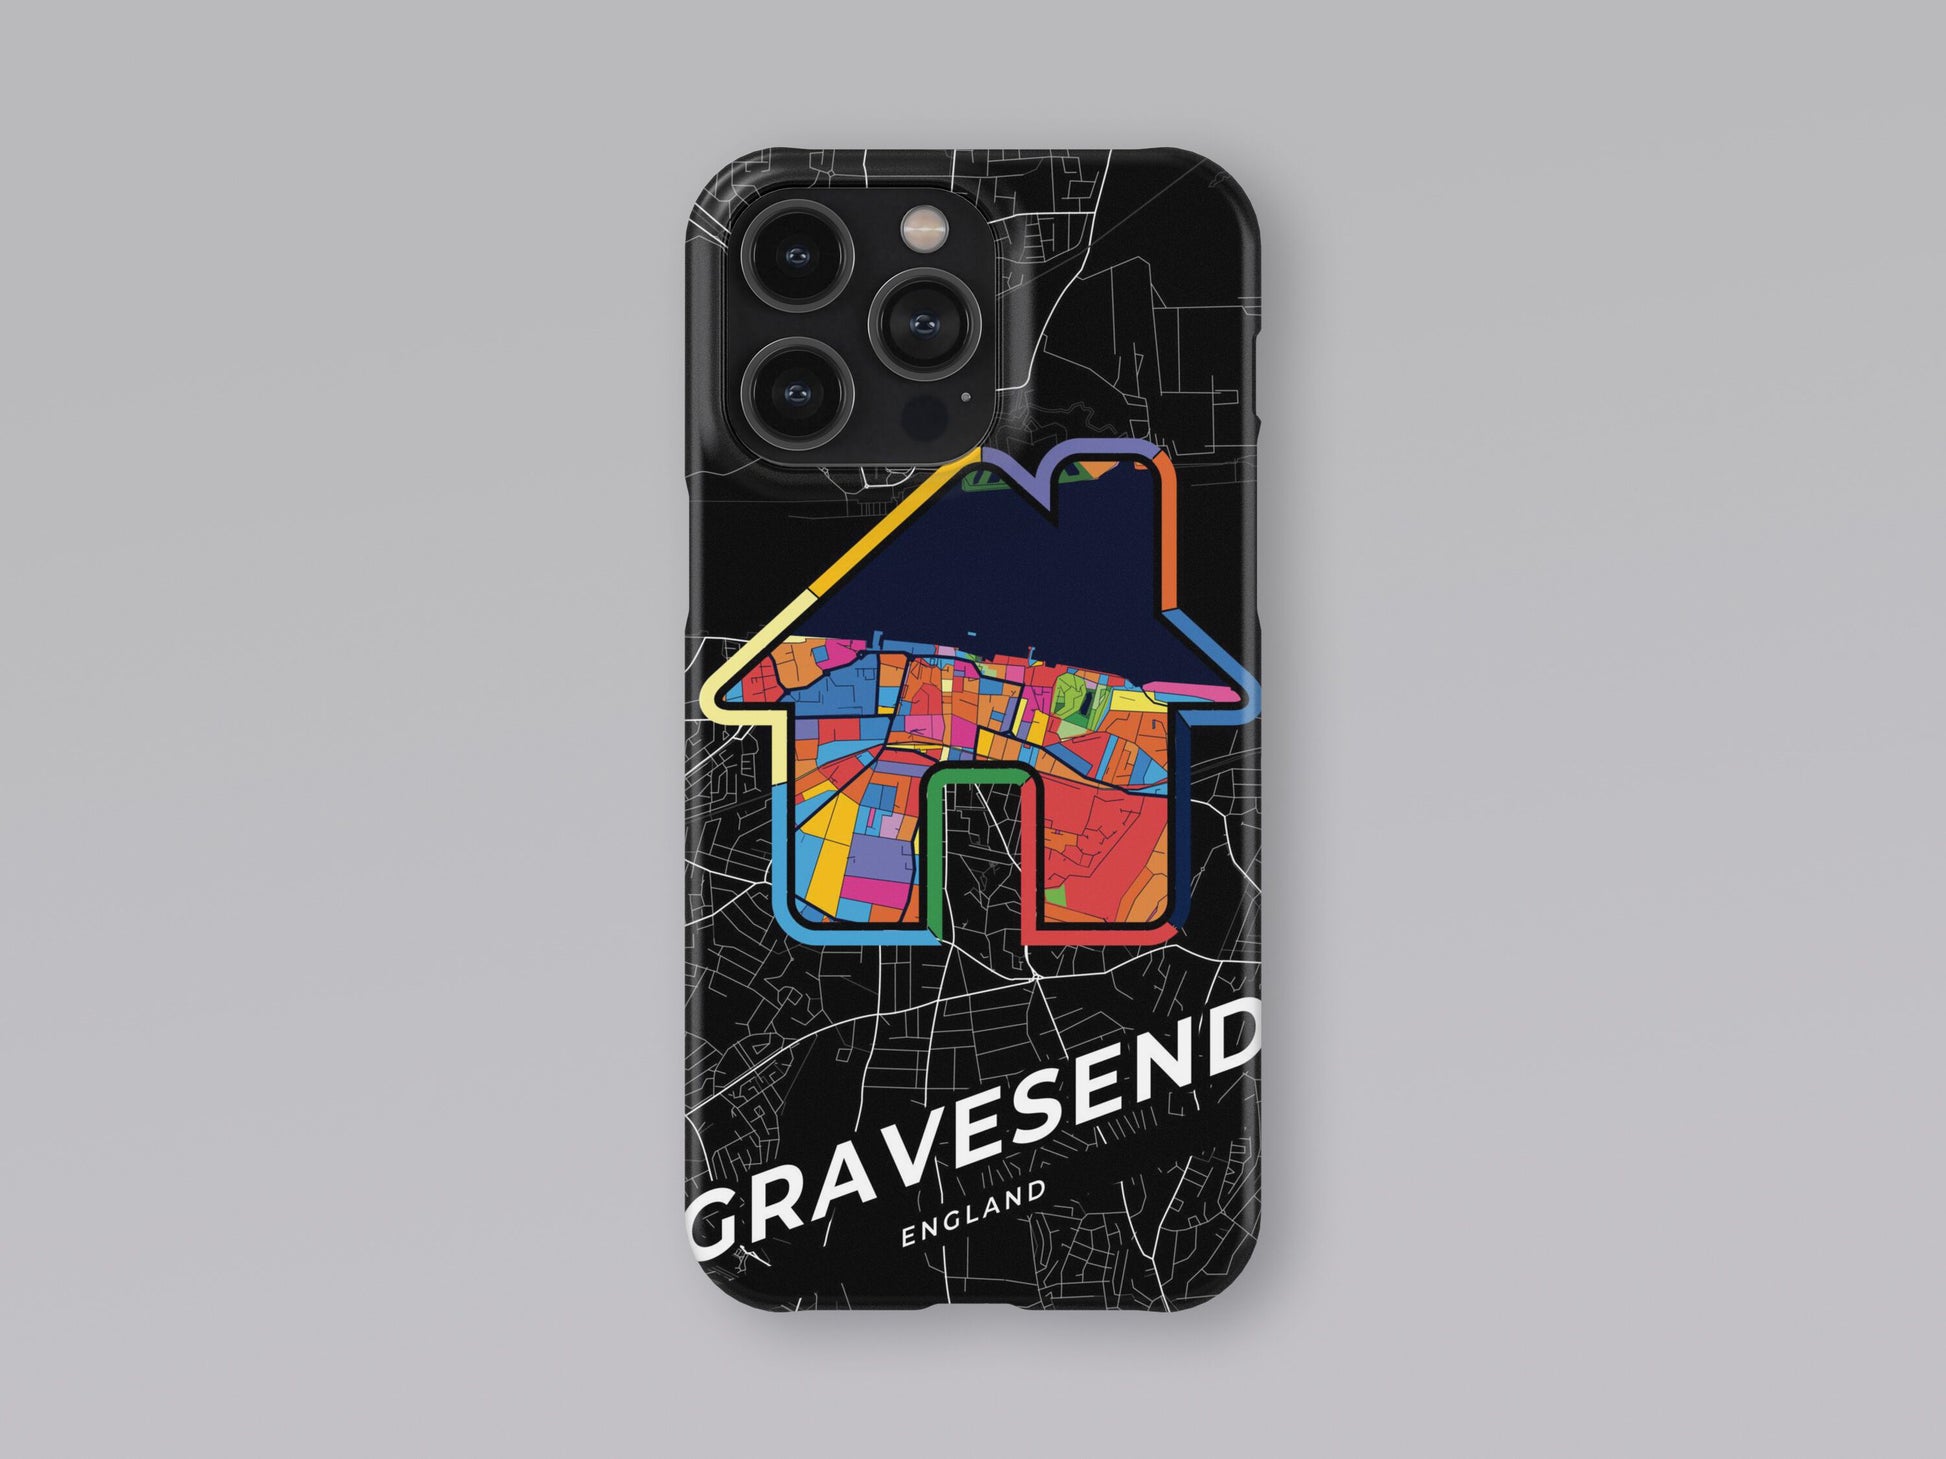 Gravesend England slim phone case with colorful icon. Birthday, wedding or housewarming gift. Couple match cases. 3